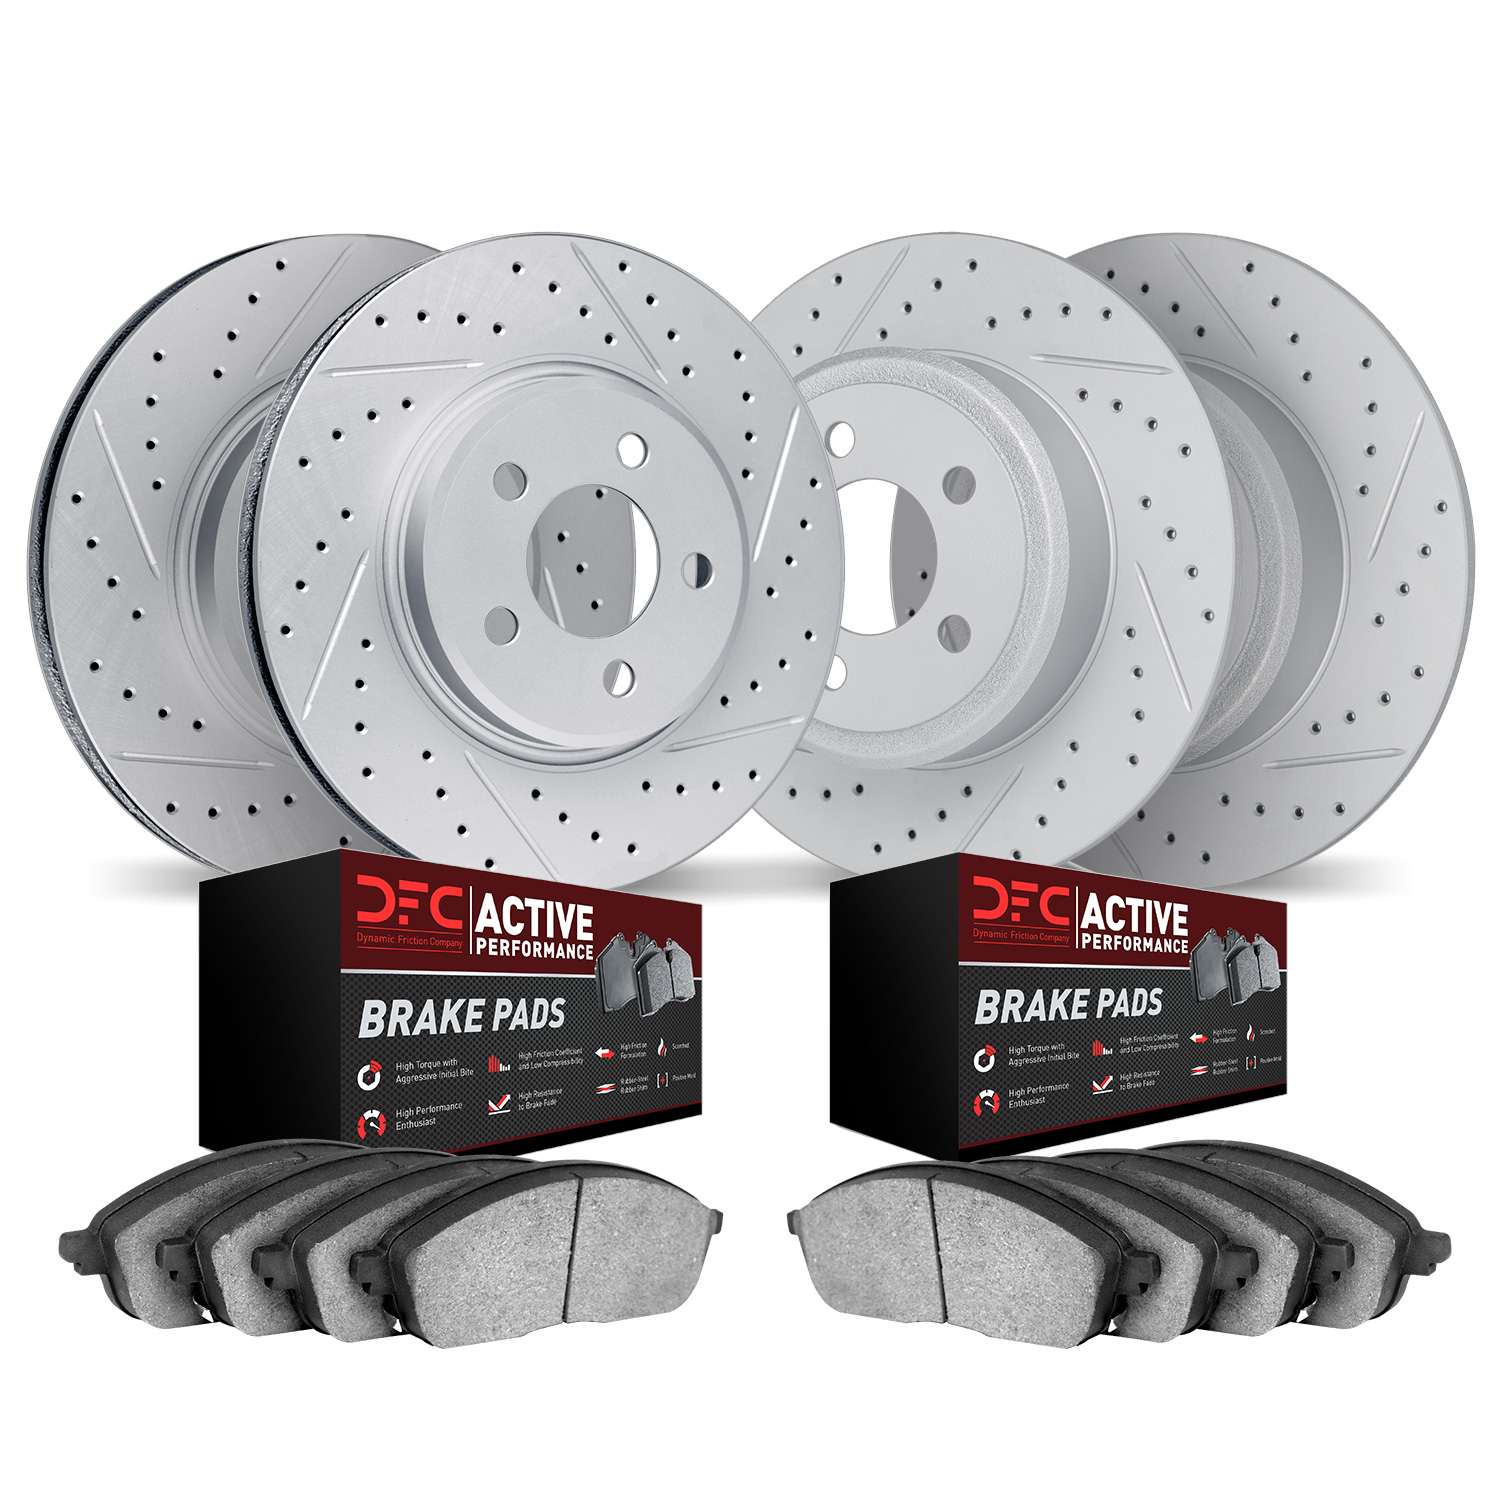 2704-13010 Geoperformance Drilled/Slotted Brake Rotors with Active Performance Pads Kit, 2003-2008 GM, Position: Front and Rear